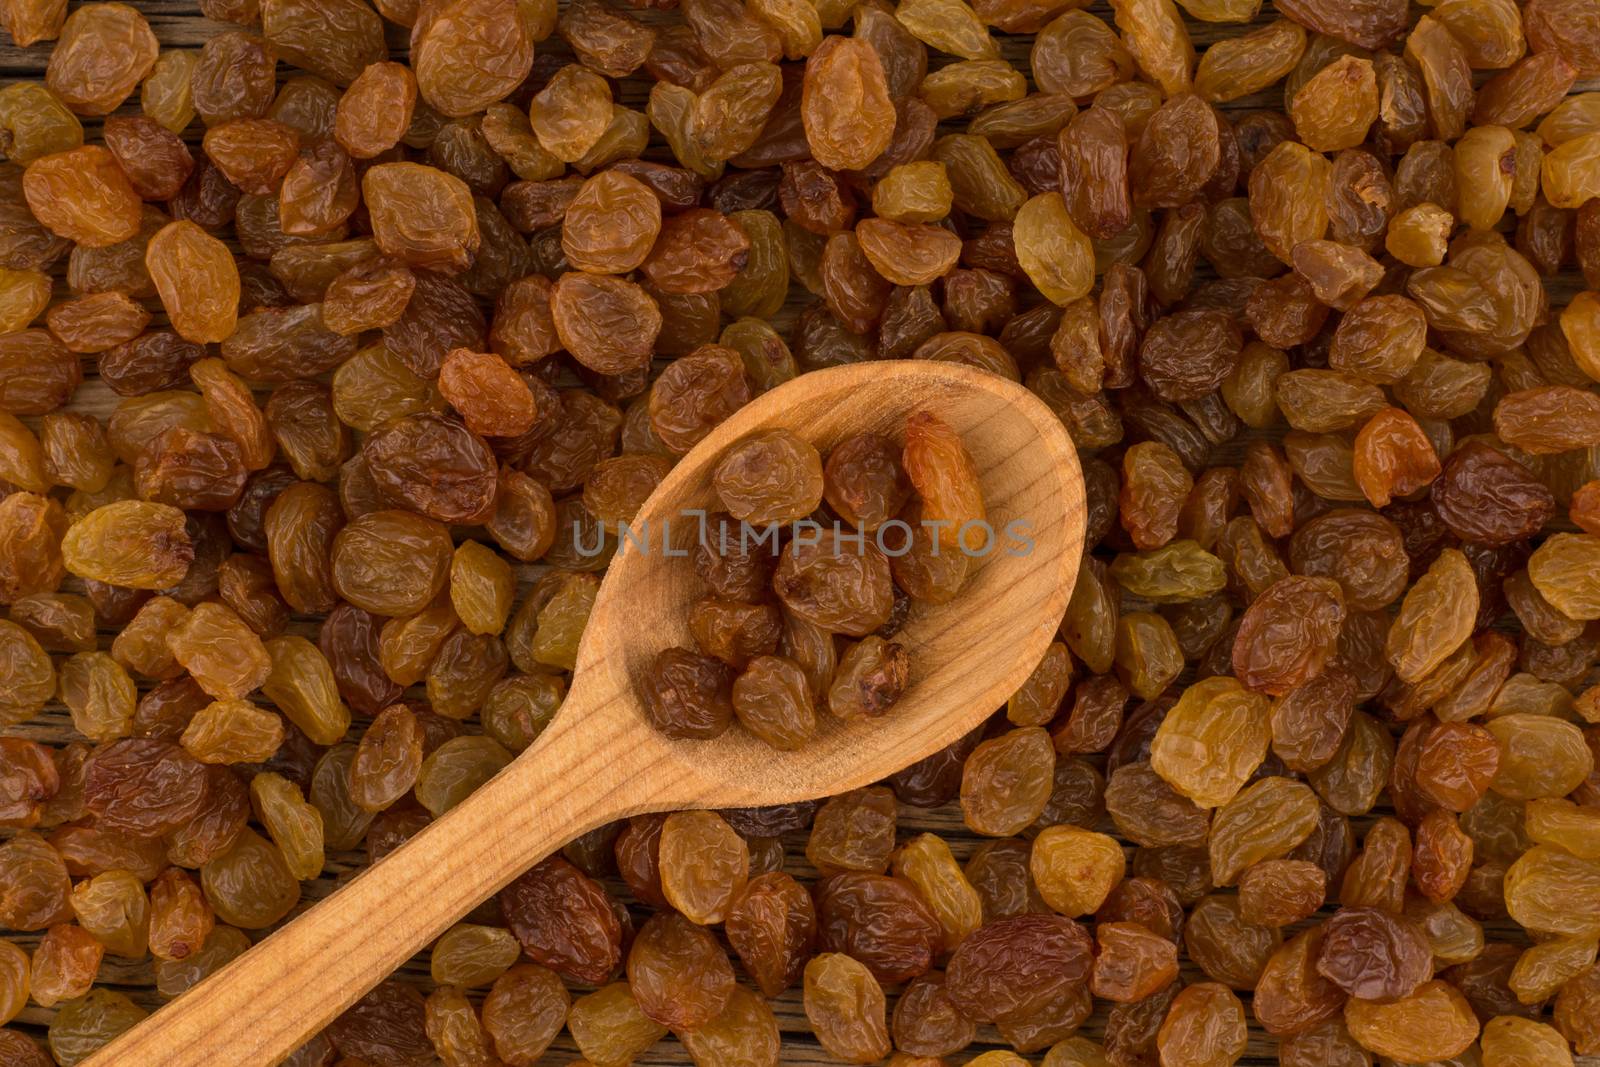 Raisins in wooden spoon and background of raisins. Top view.